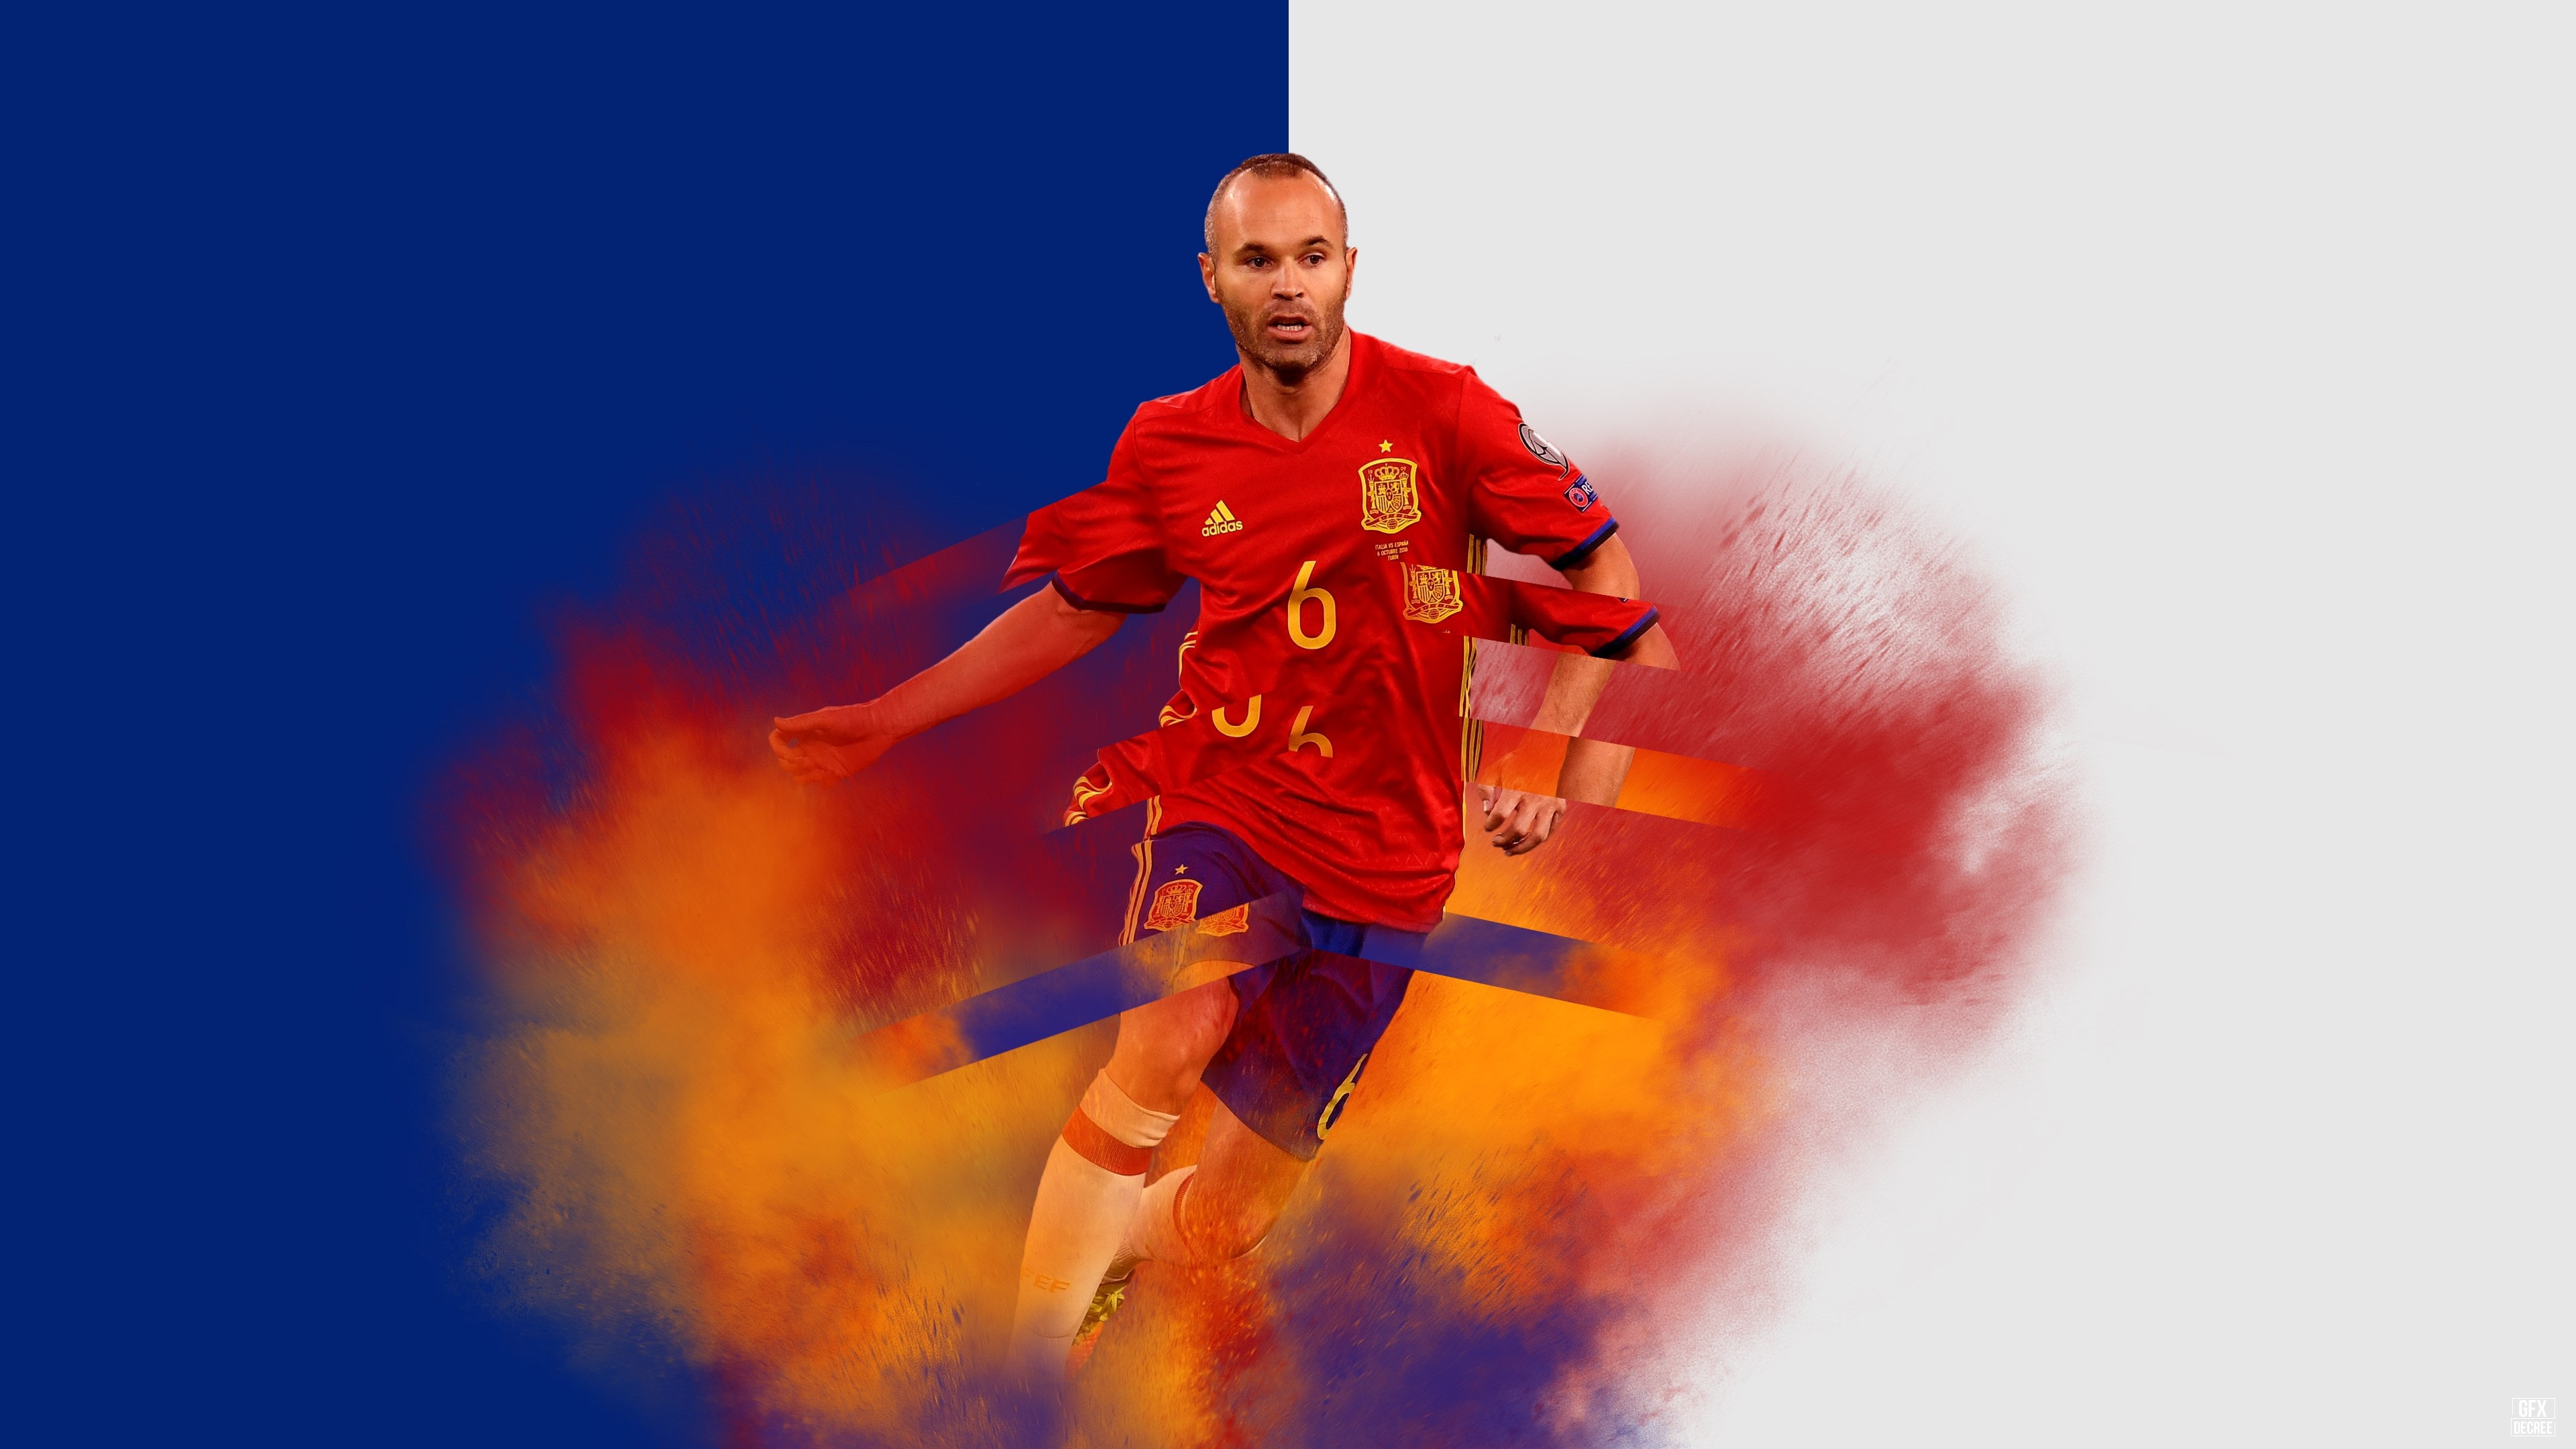 andres iniesta 4k hd background image